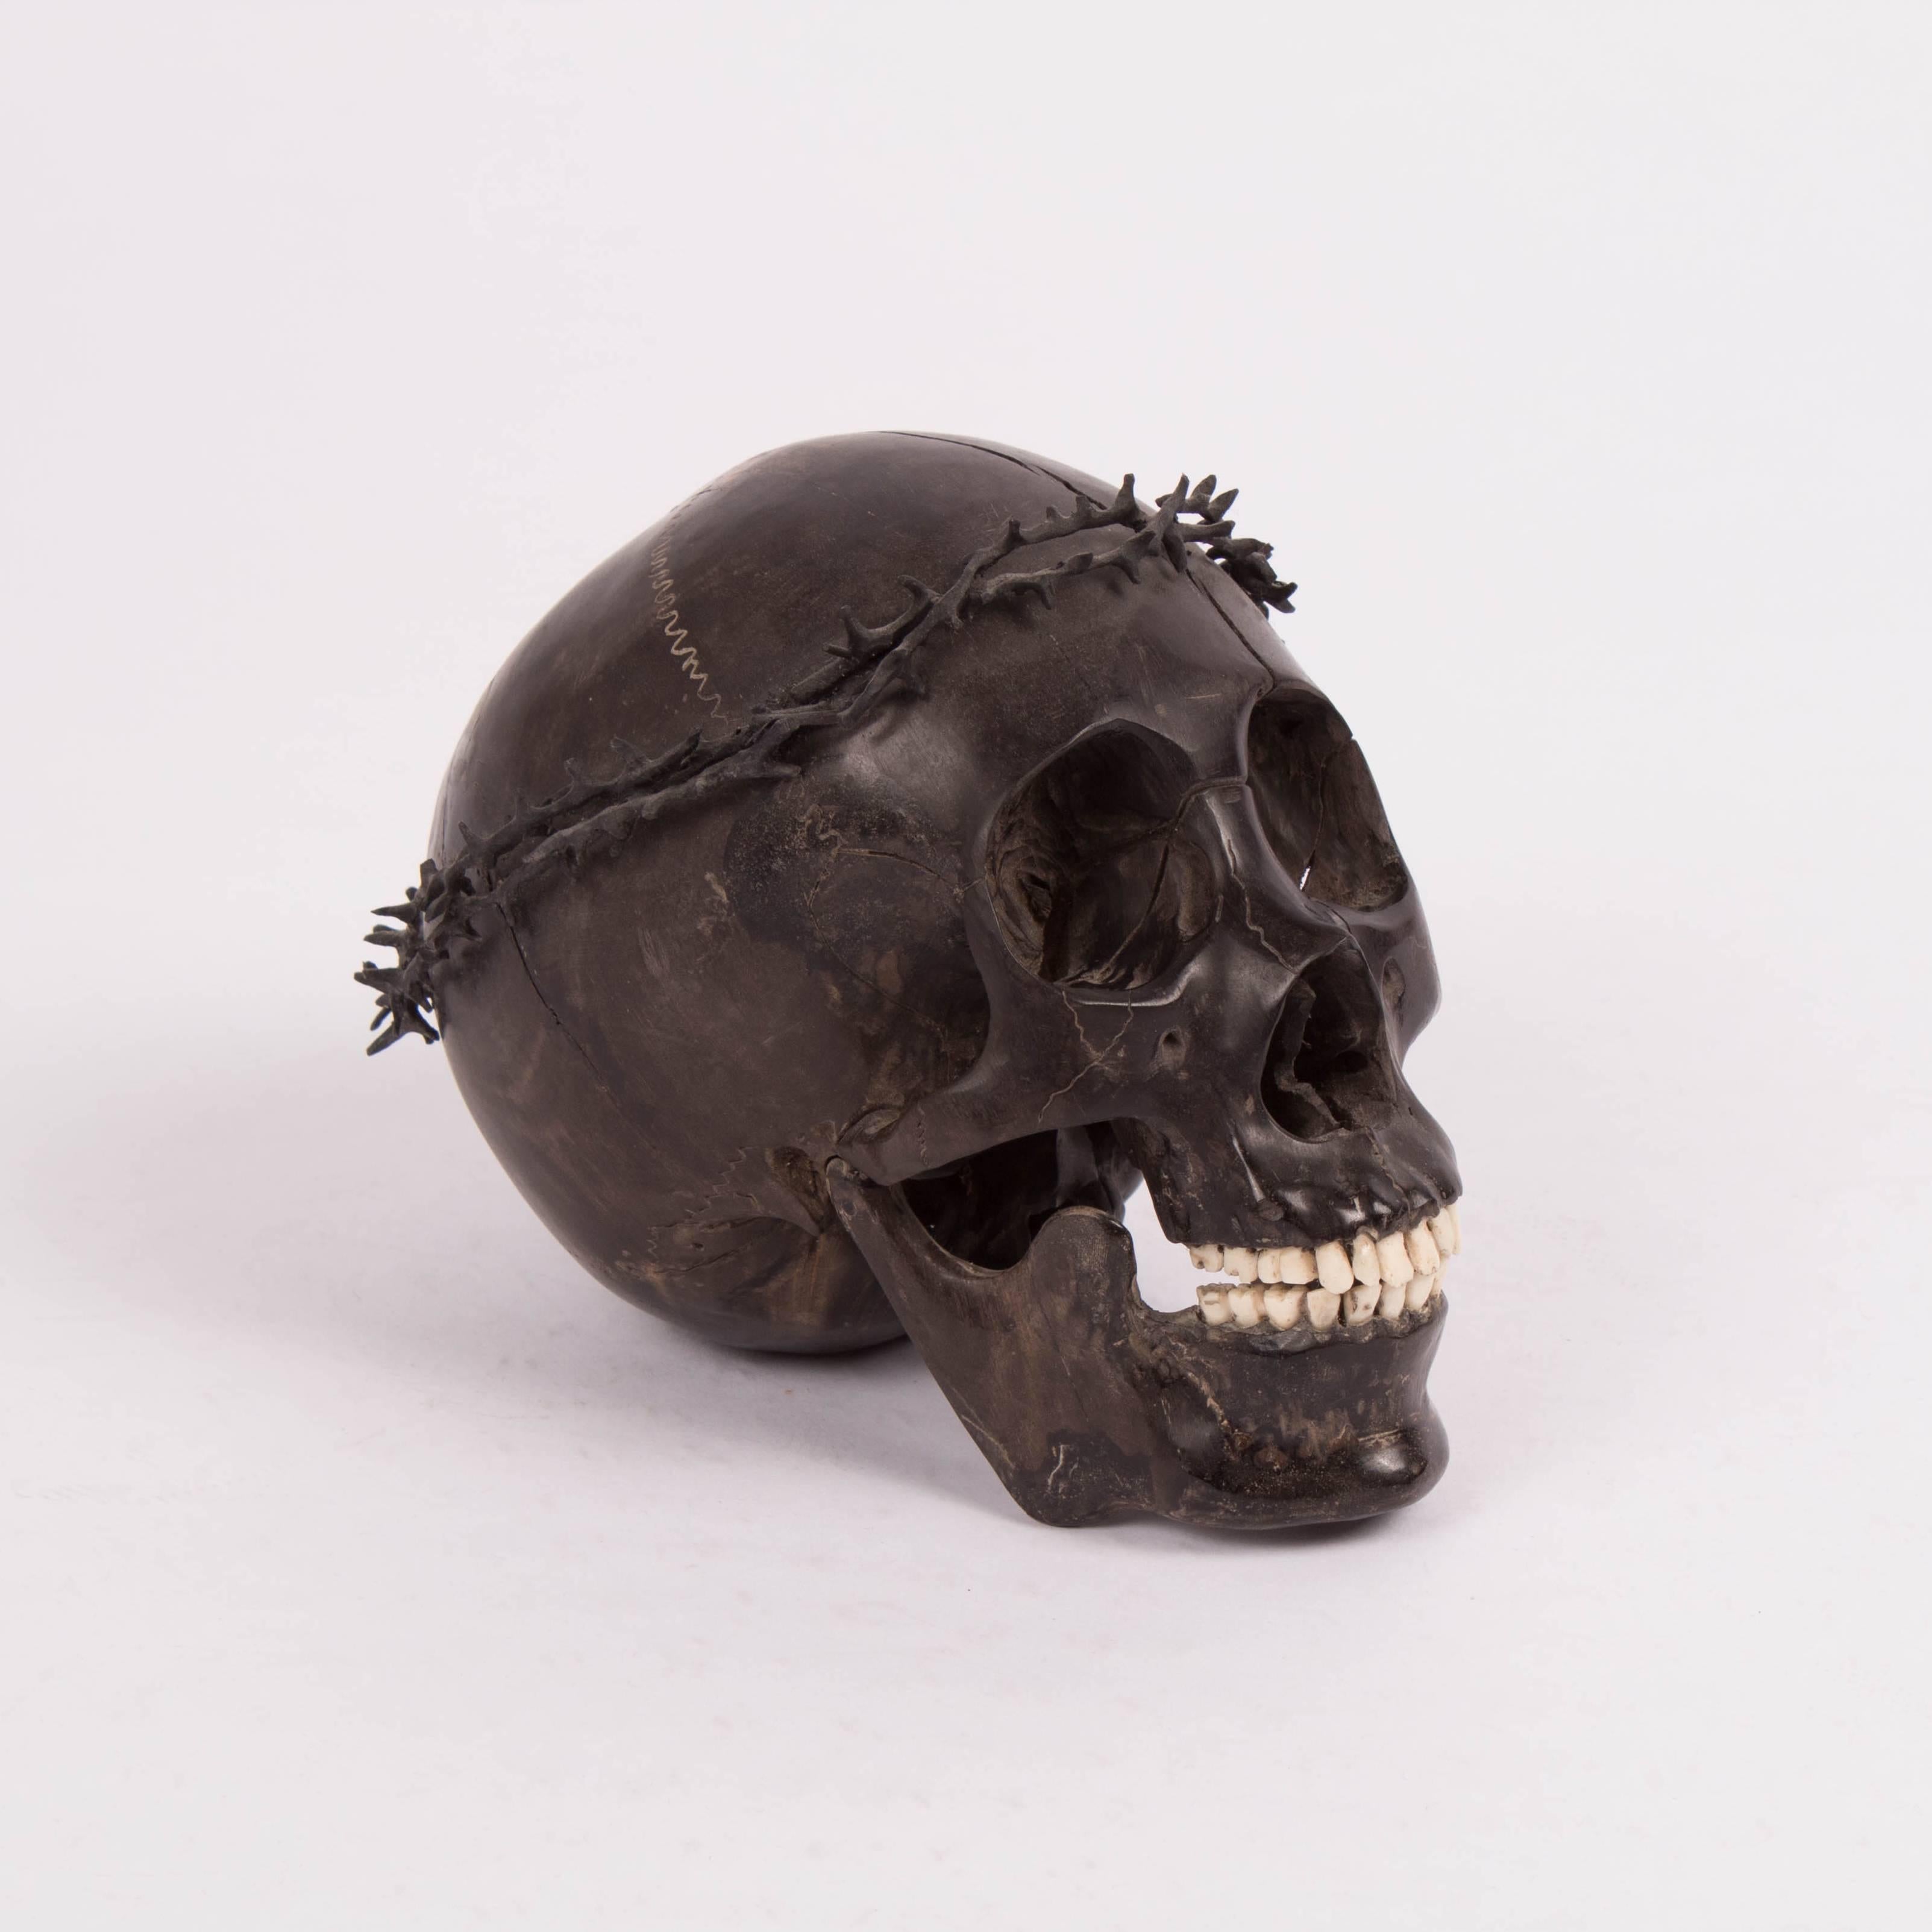 Indonesian Carved Wooden Skull with Crown of Thorns